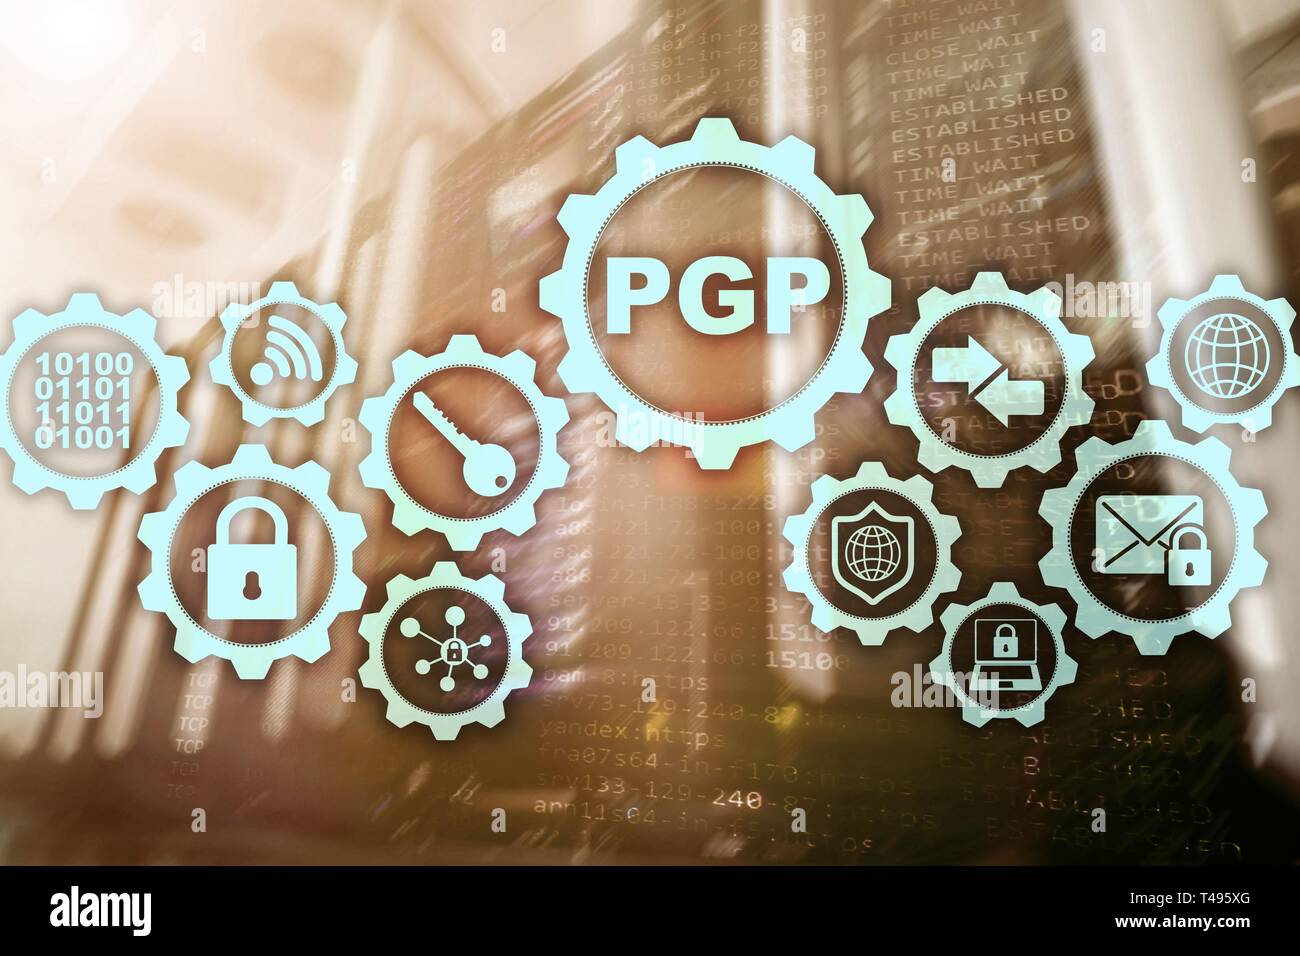 PGP. Pretty Good Privacy. Technology Encryption and Security concept. Stock Photo